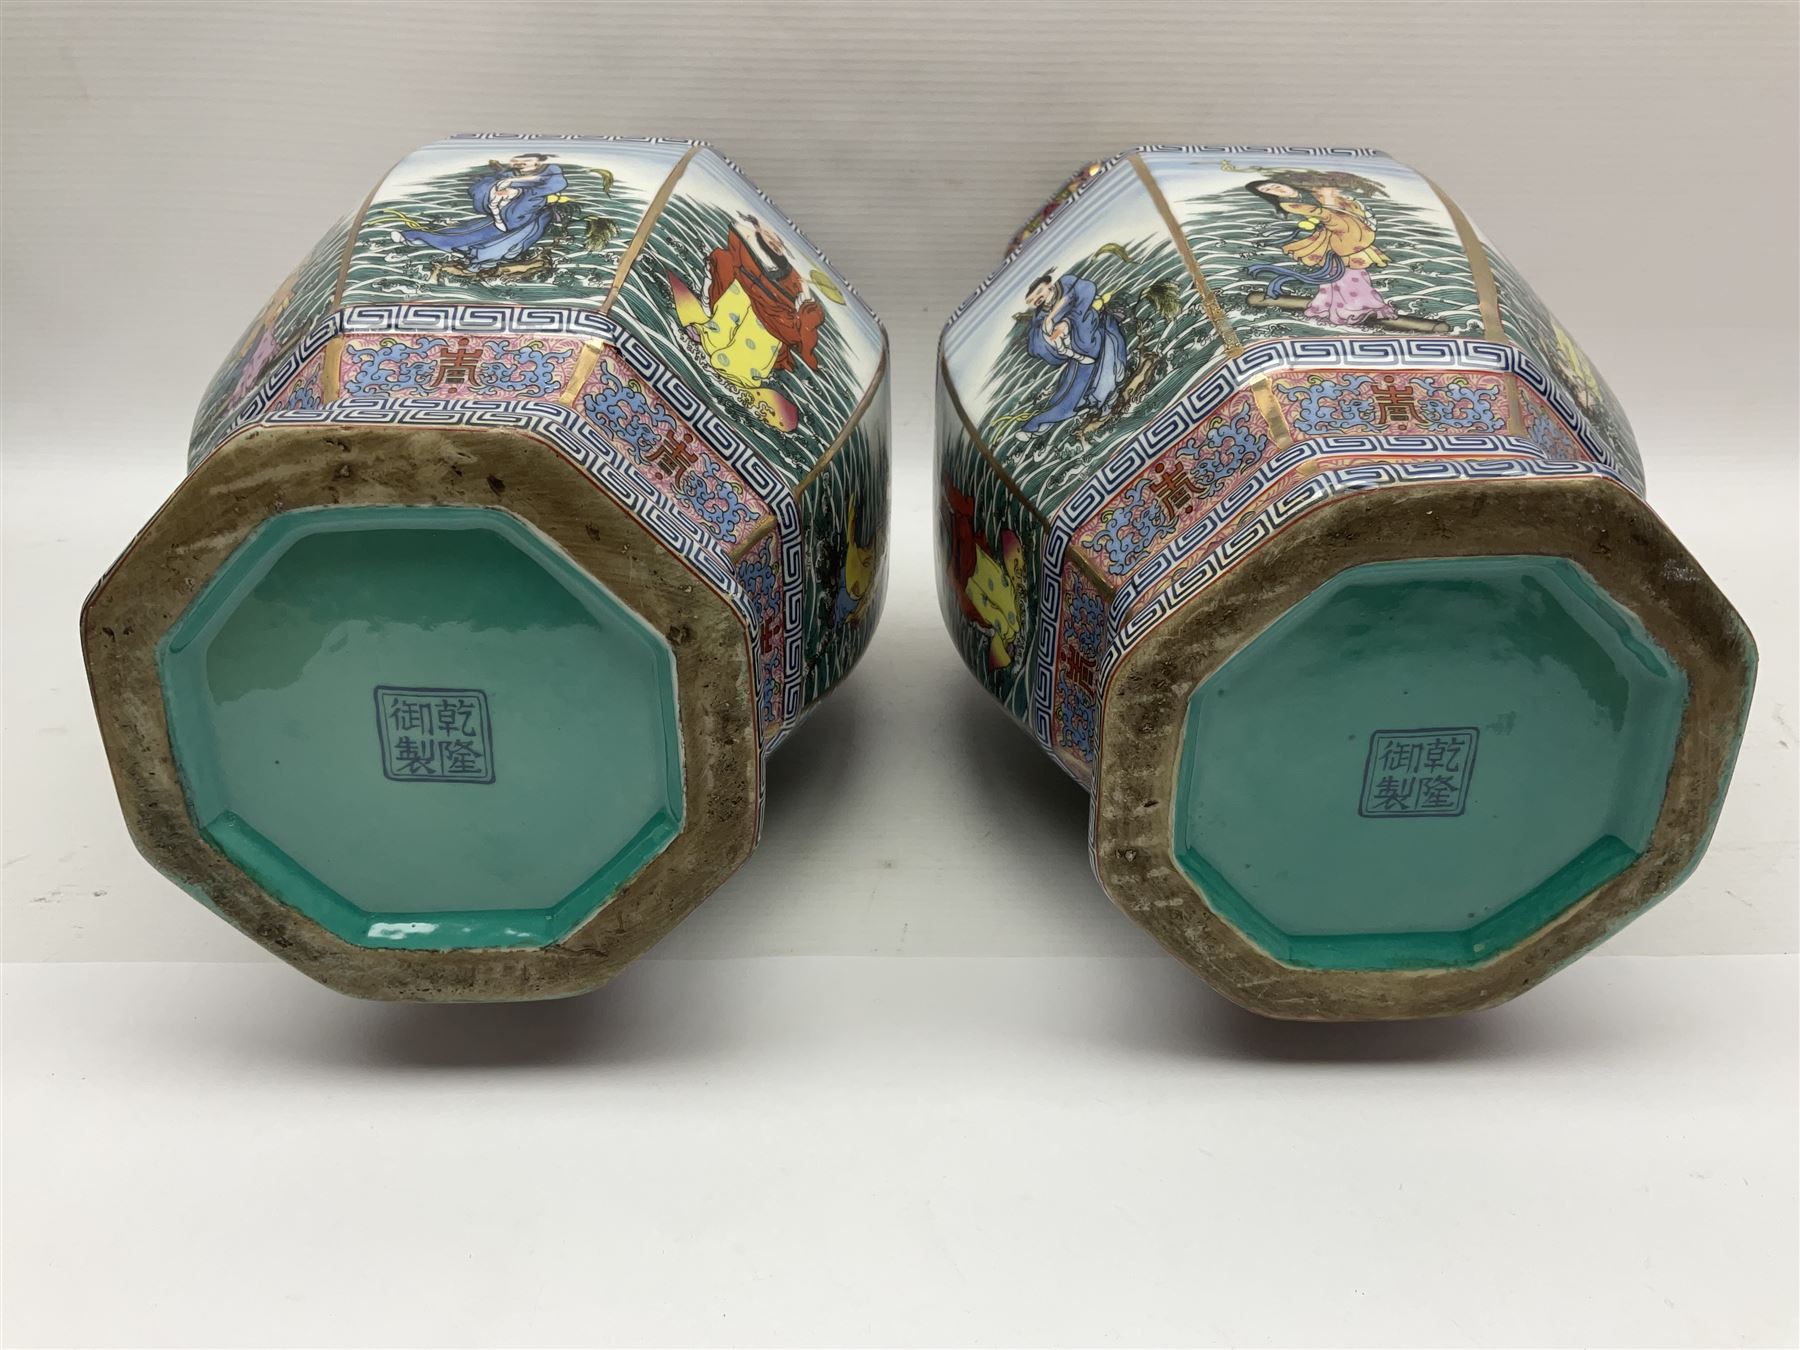 Pair of 20th century Chinese vases - Image 11 of 12